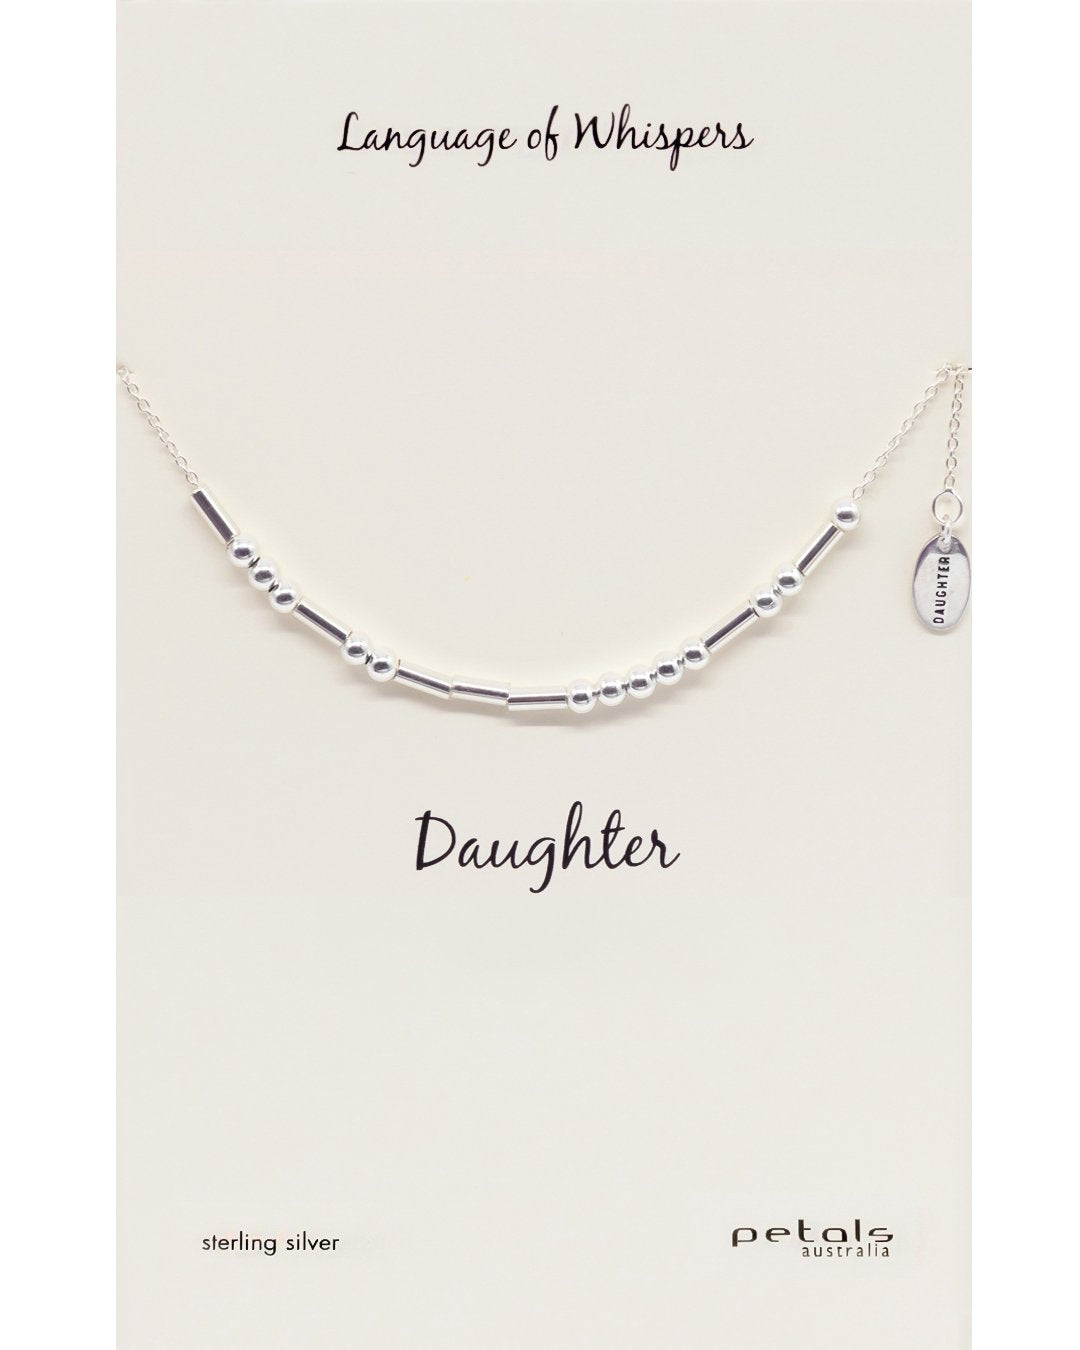 Daughter Morse Code Necklace